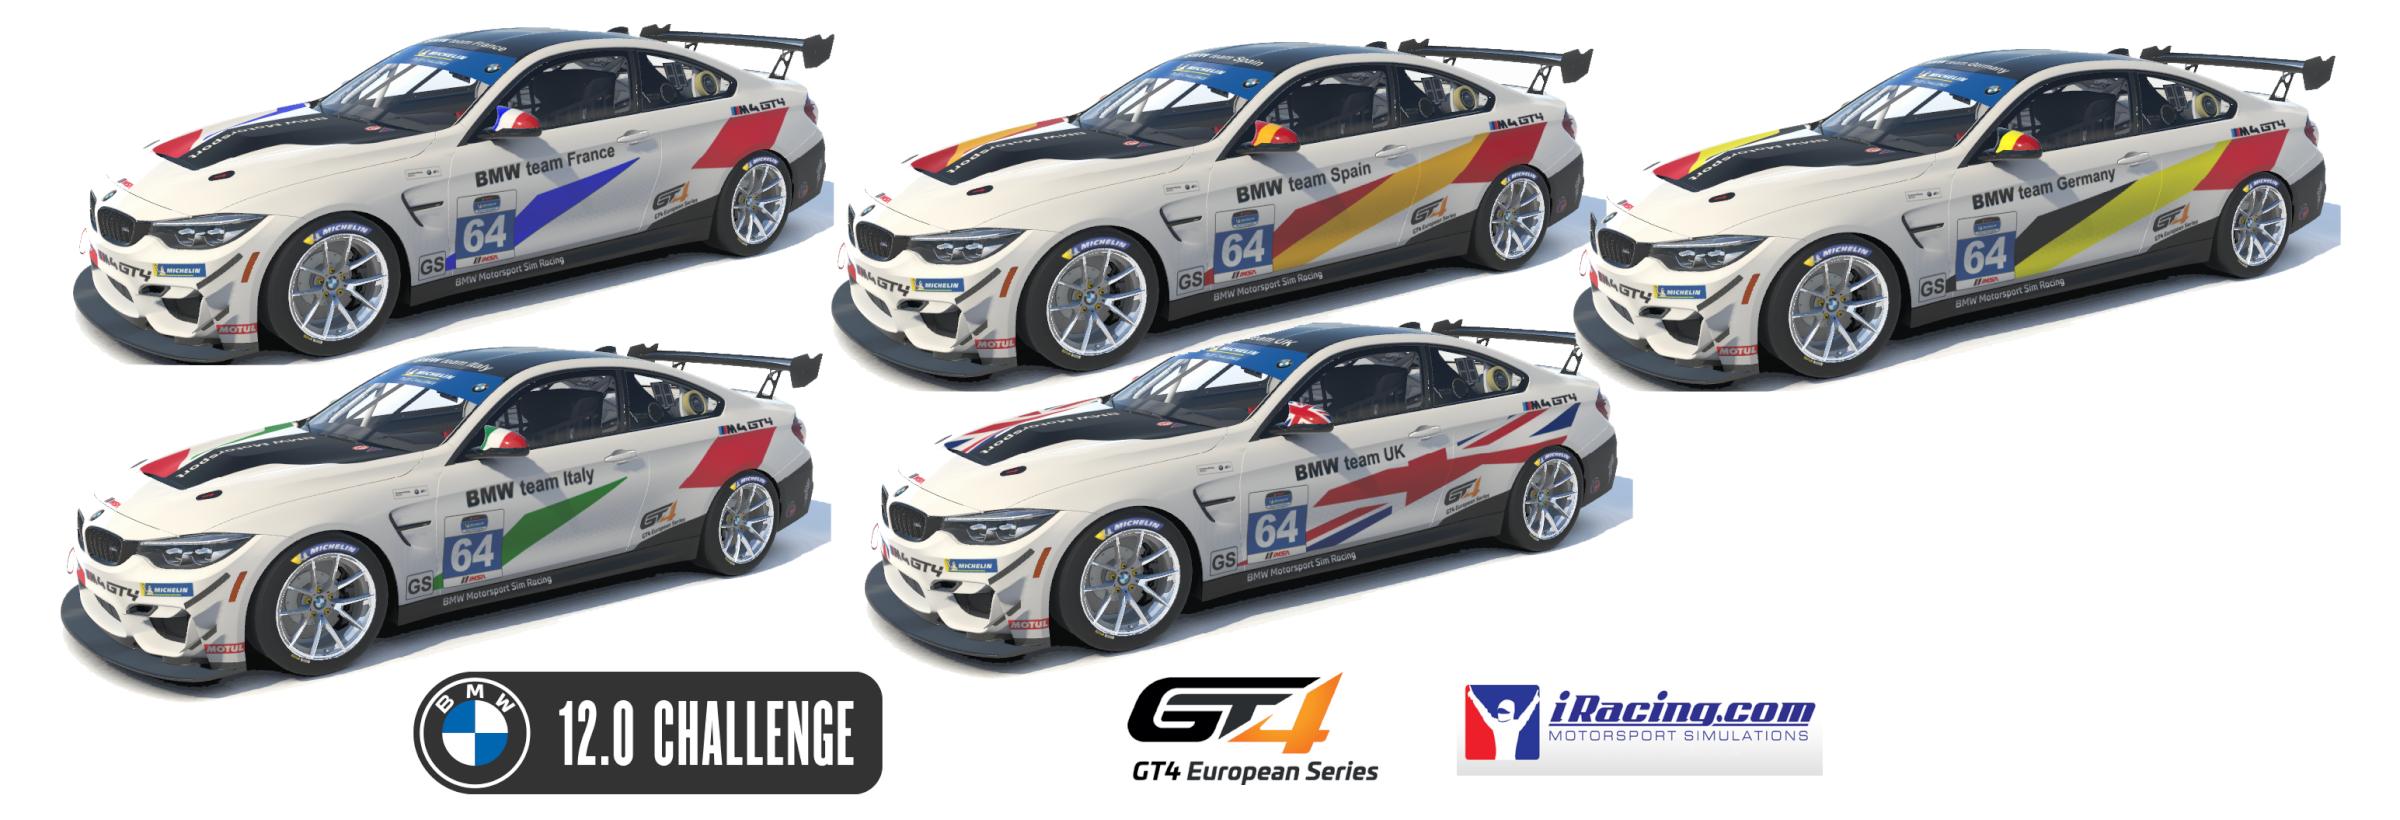 Preview of BMW M4 GT4 team UK by Remigio DiPasqua